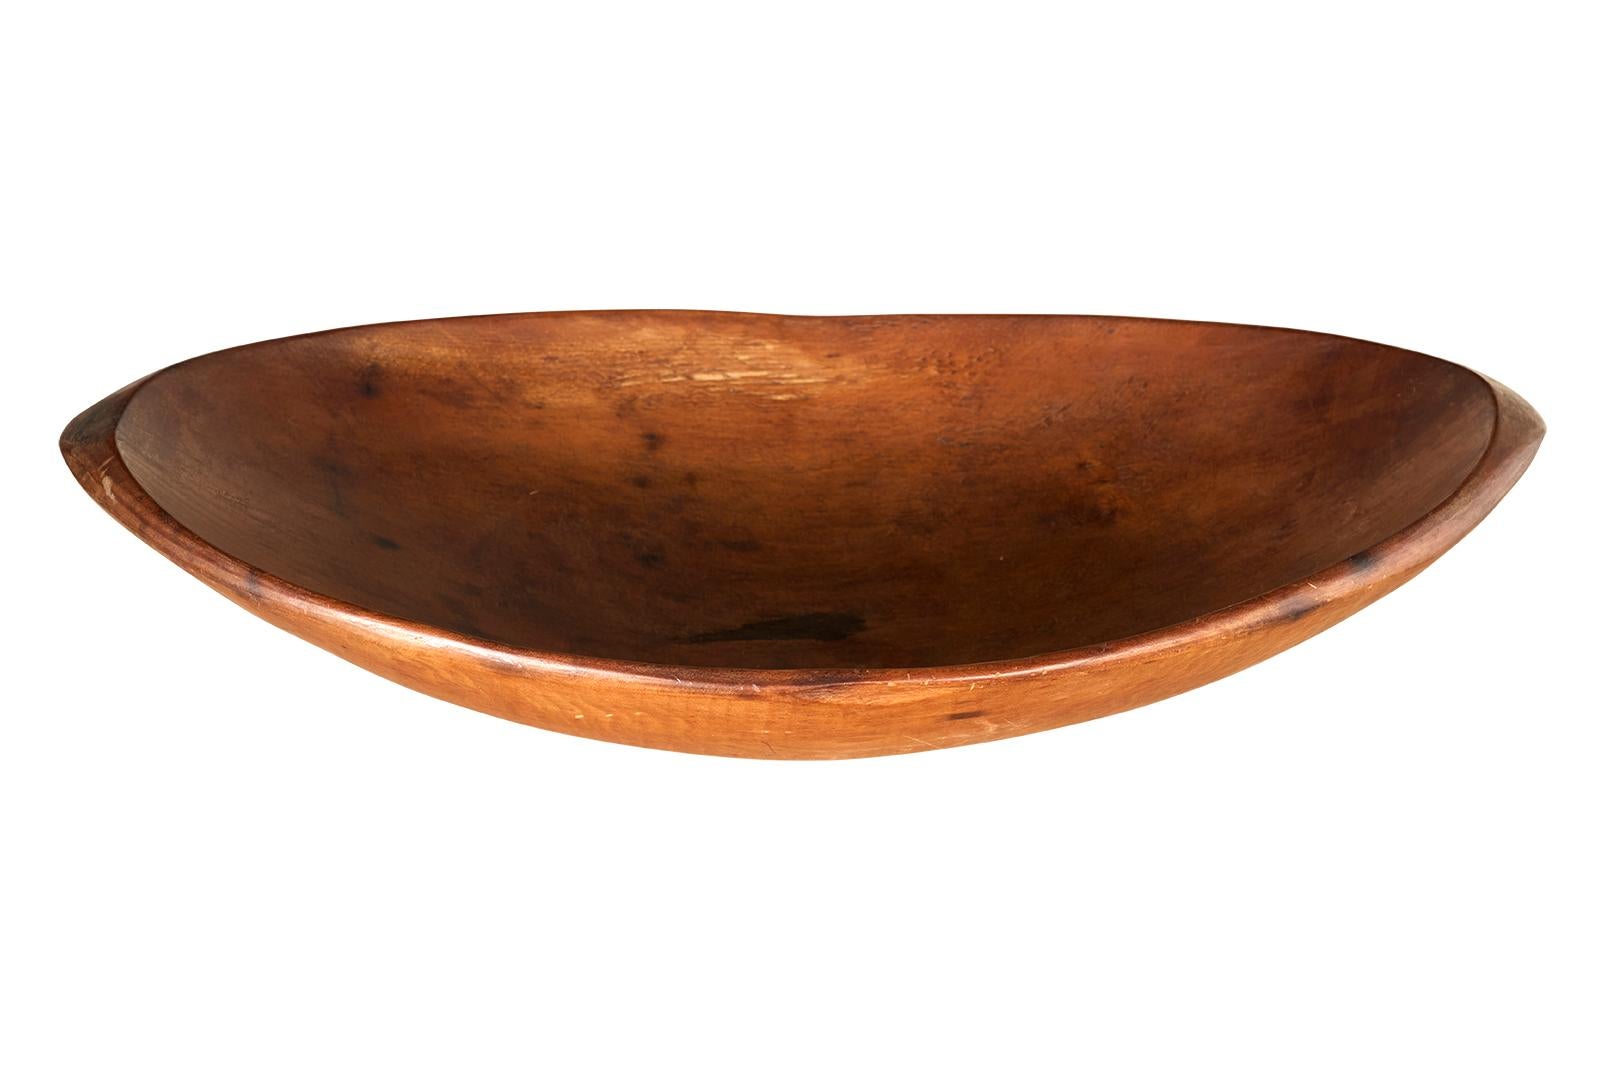 Organic Modern Early Oval Hand Carved Wood Bowl For Sale